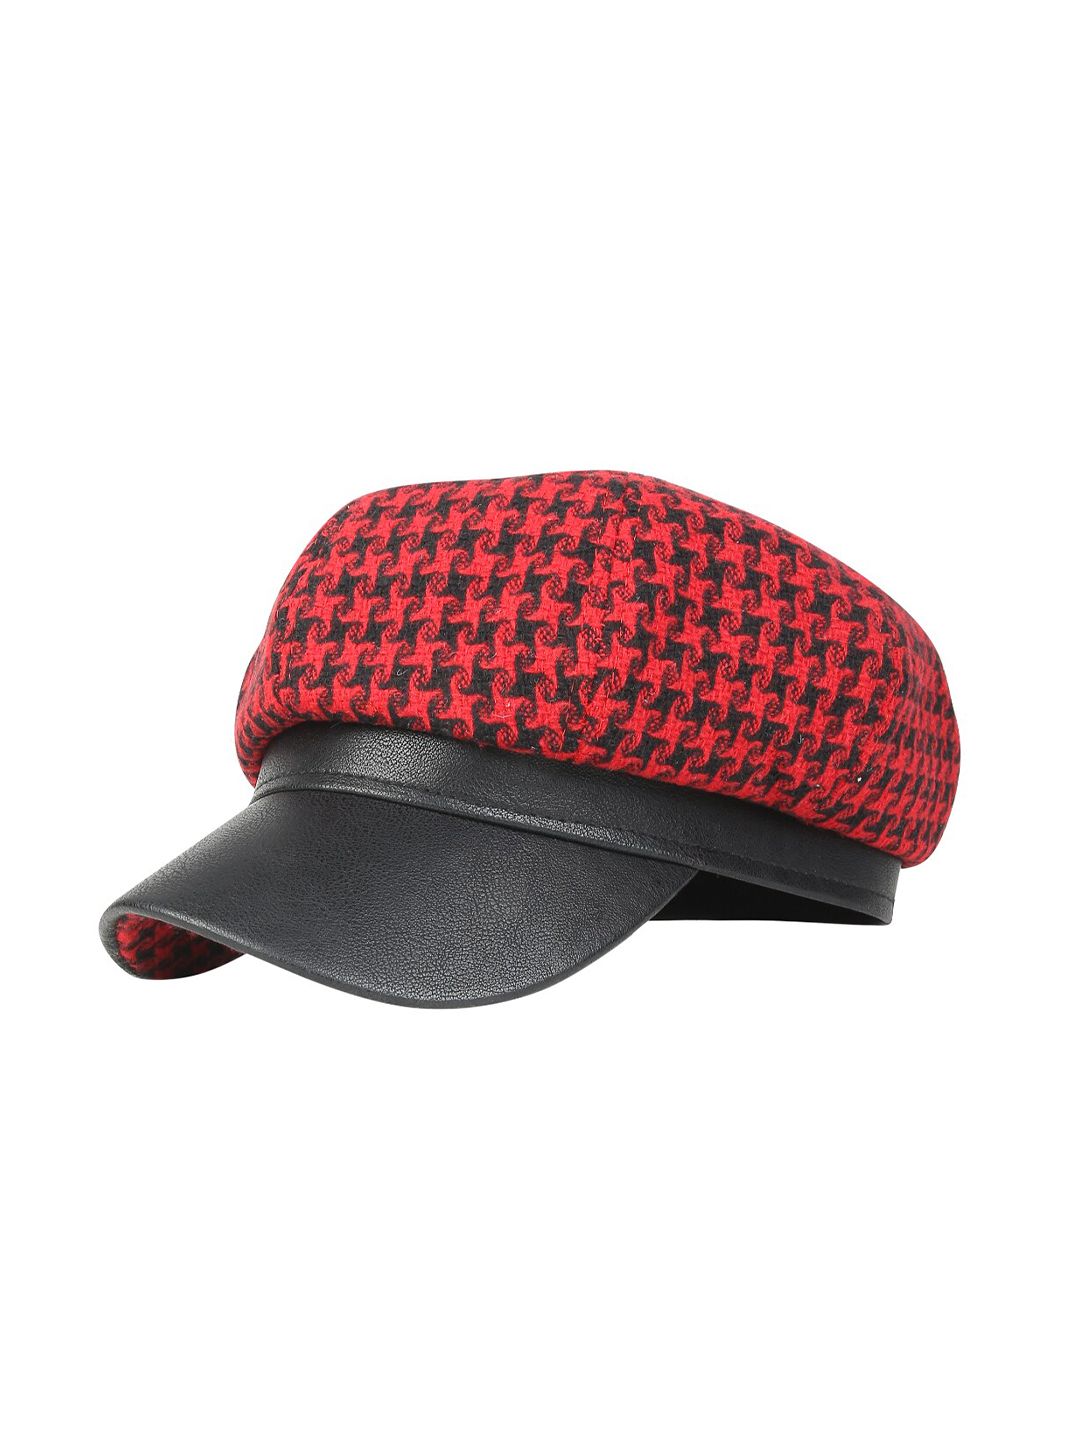 iSWEVEN Unisex Red & Black Printed Ascot Cap Price in India